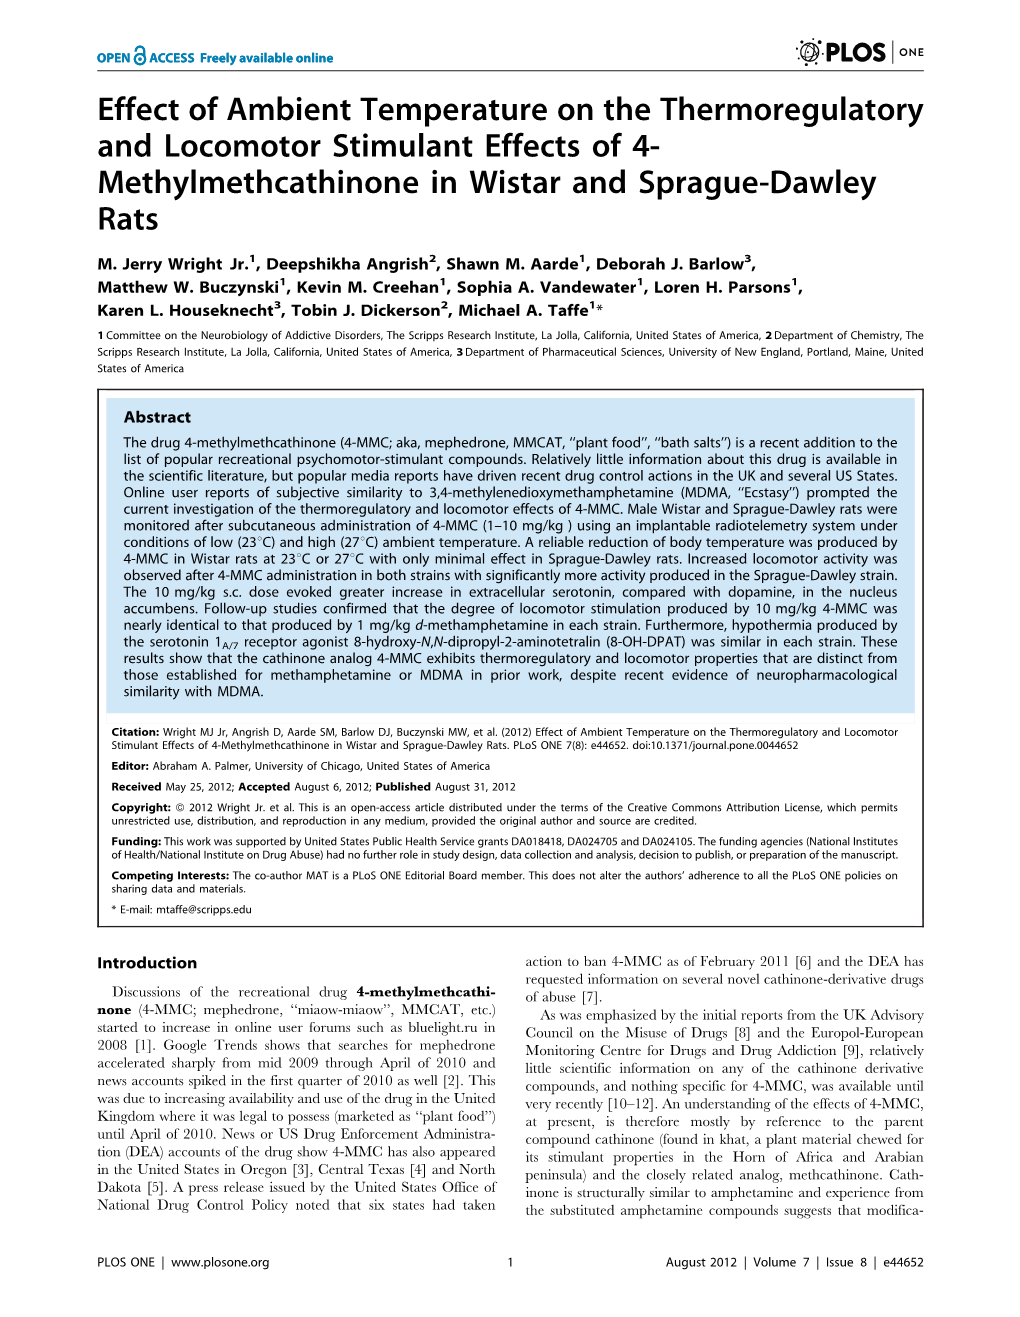 Effect of Ambient Temperature on the Thermoregulatory and Locomotor Stimulant Effects of 4- Methylmethcathinone in Wistar and Sprague-Dawley Rats